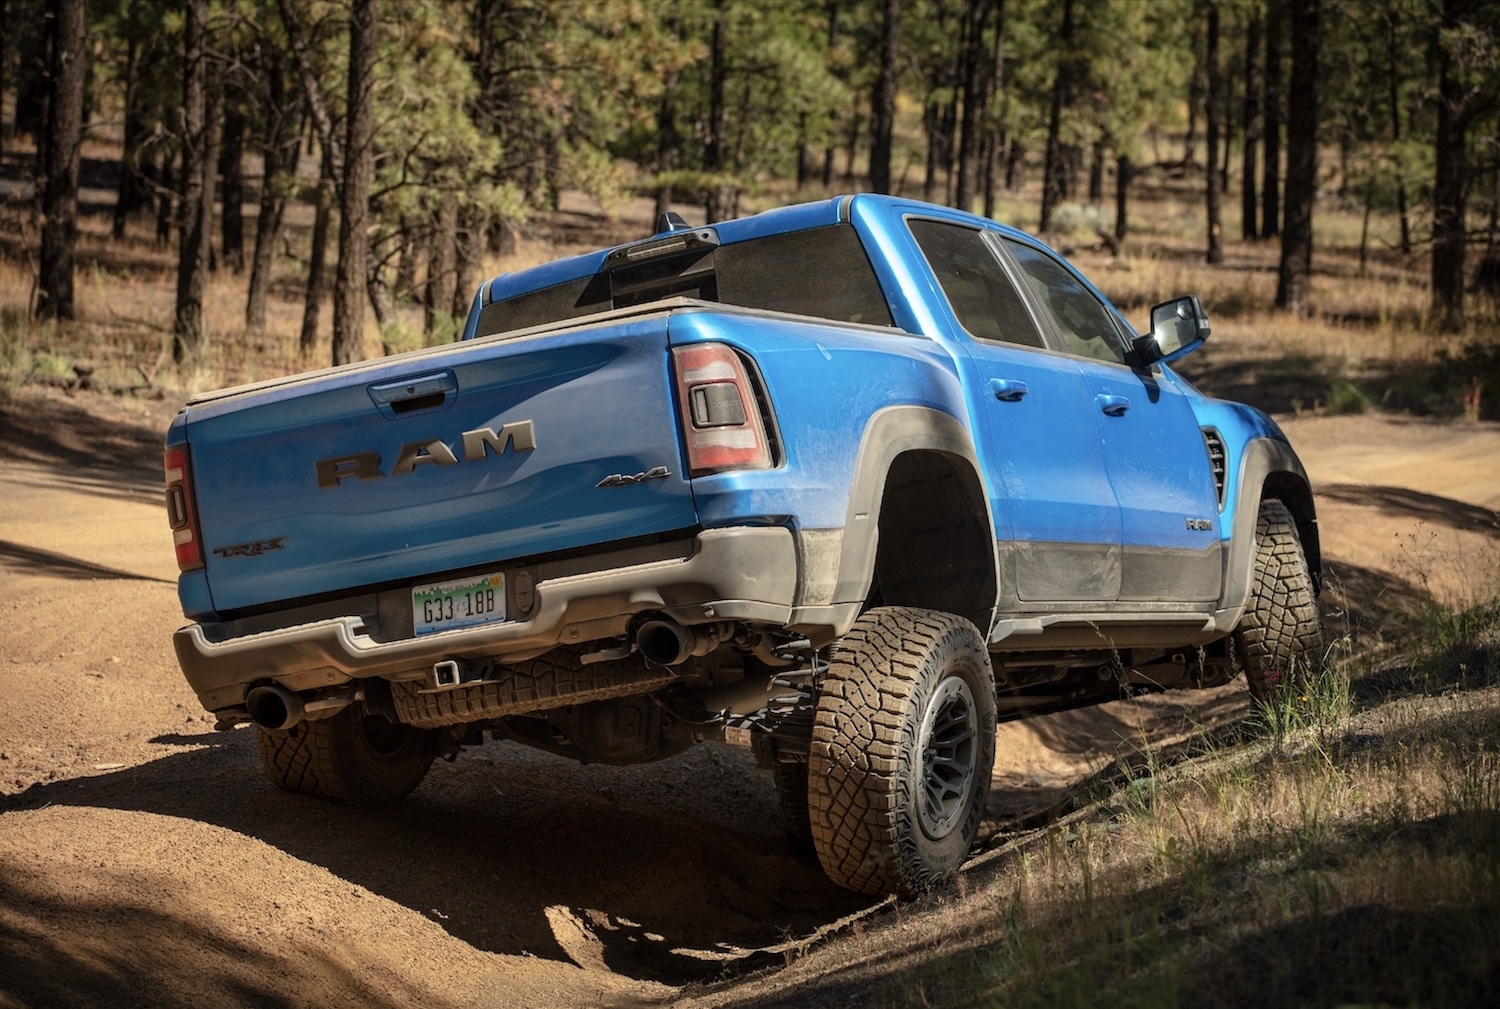 Blue Ram 1500 TRX off-roading in front of a wooded mountainside.